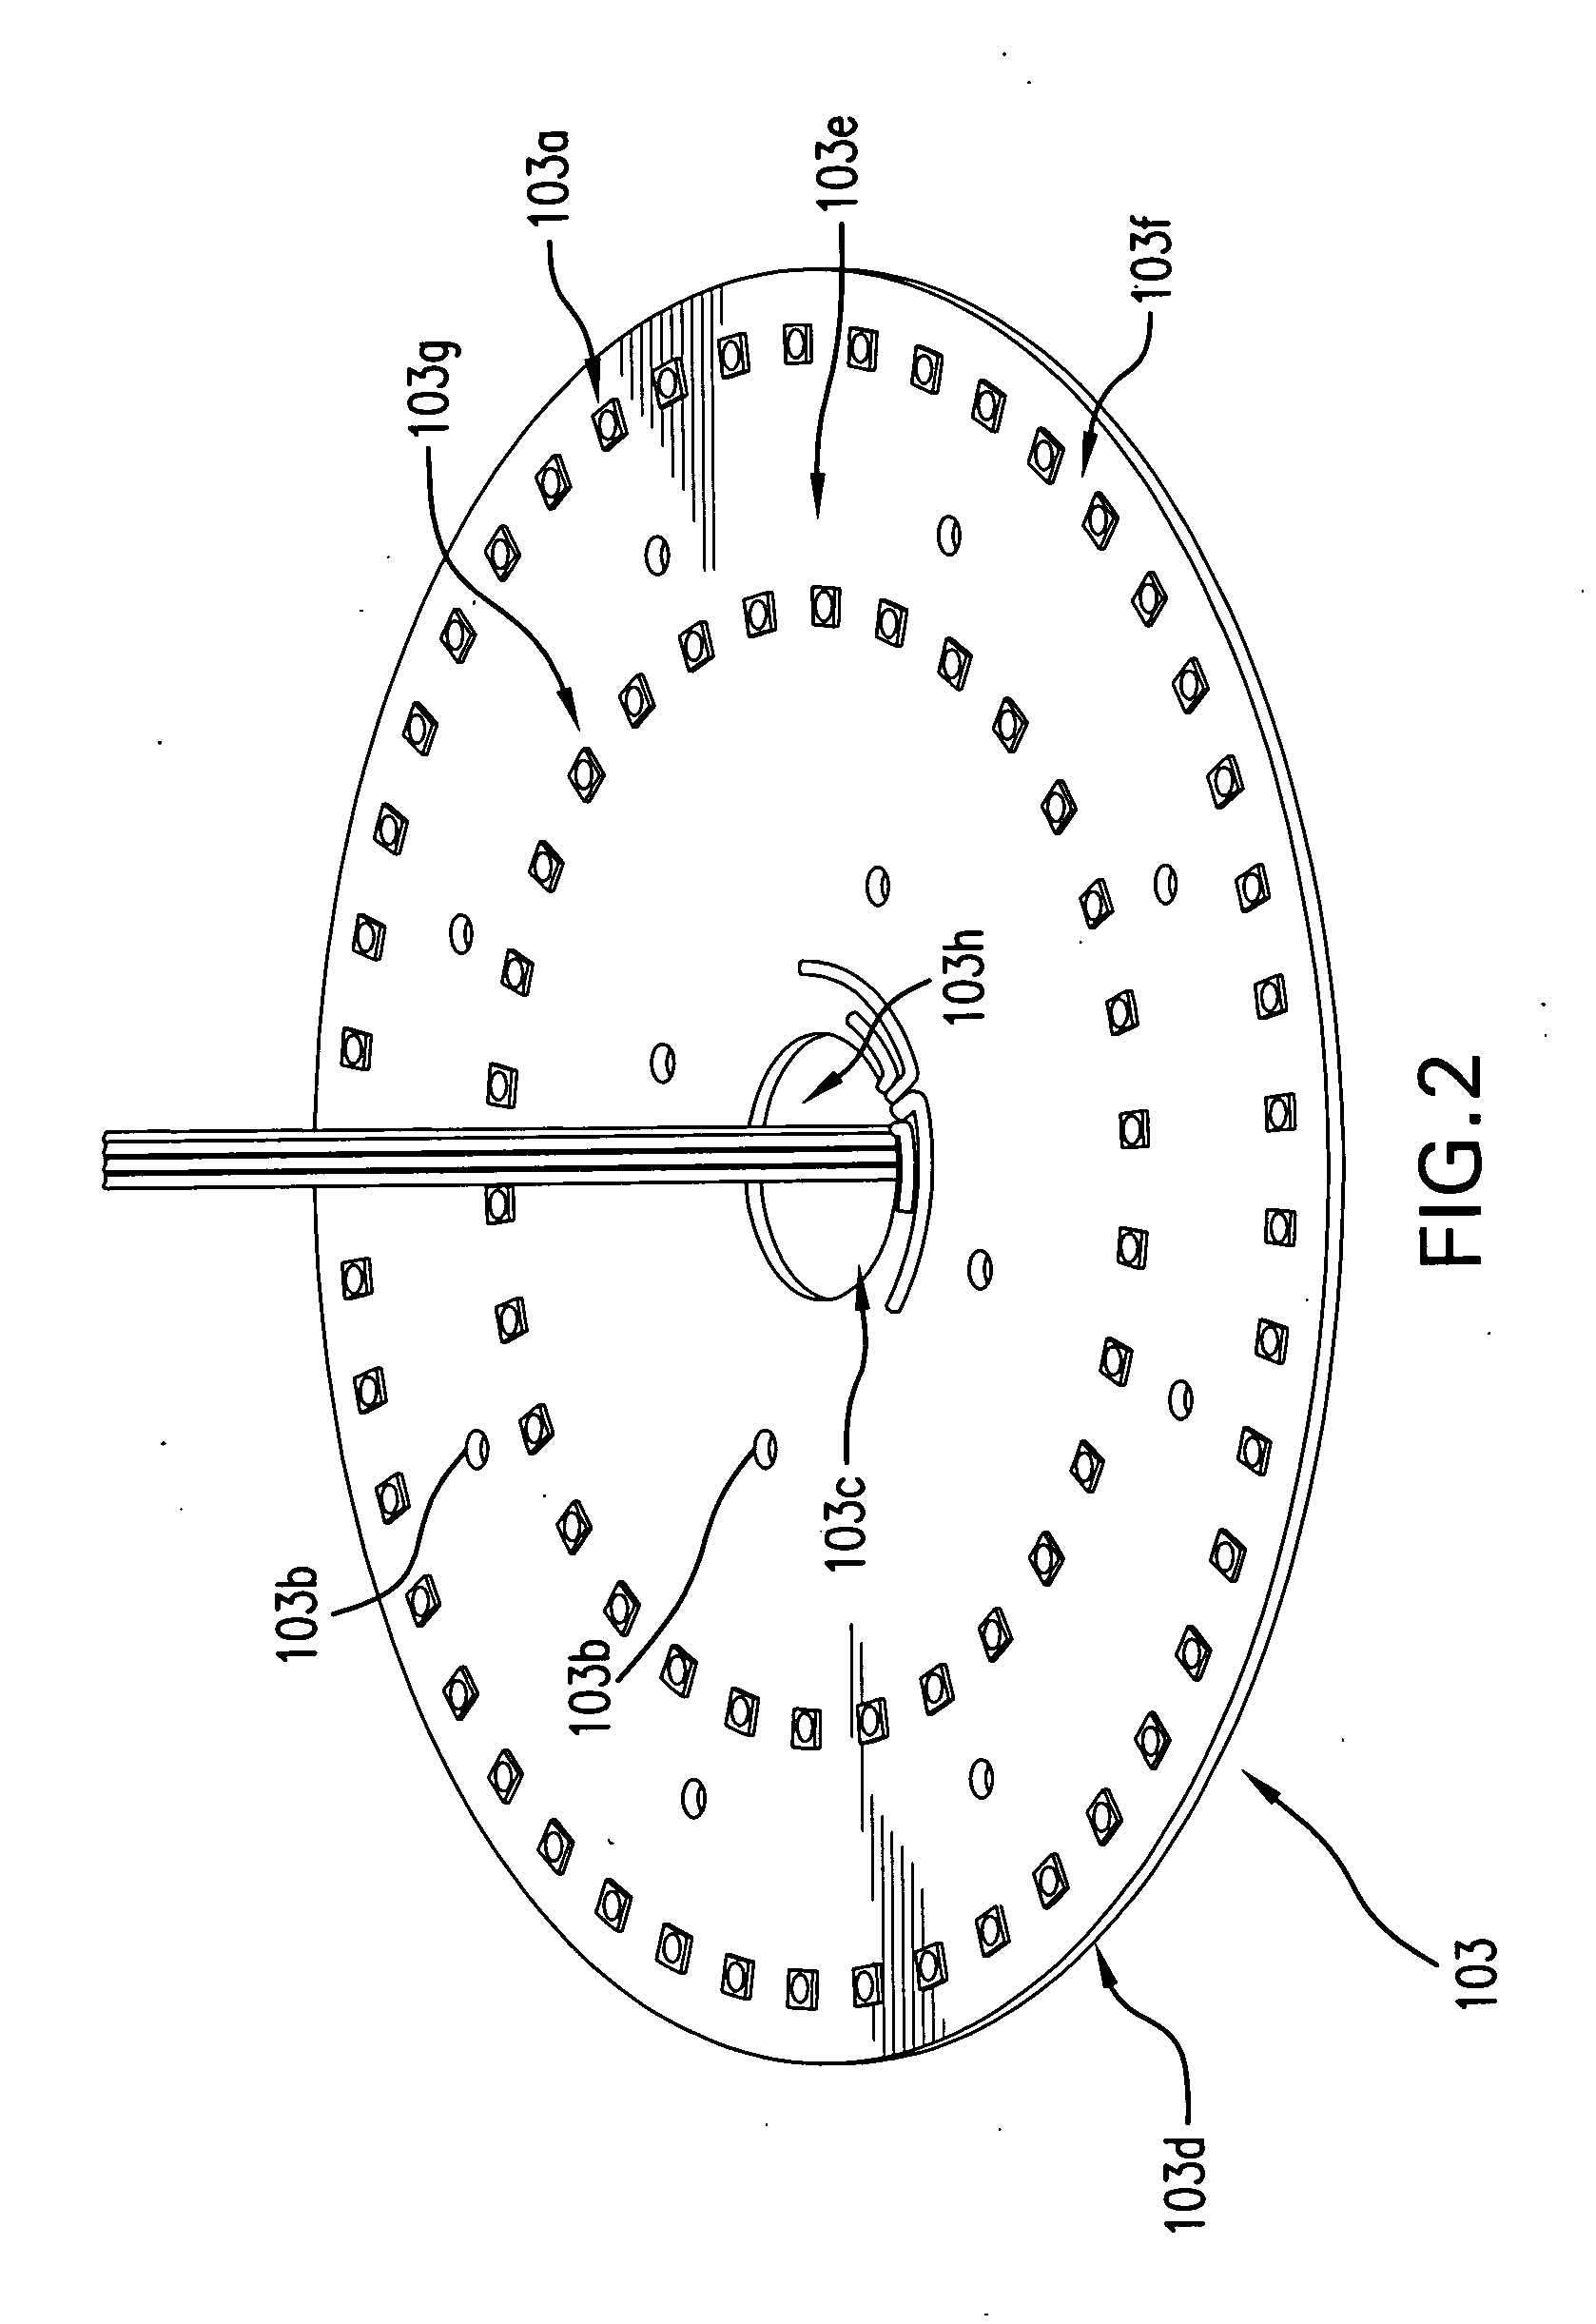 Systems and methods for retrofitting existing lighting systems